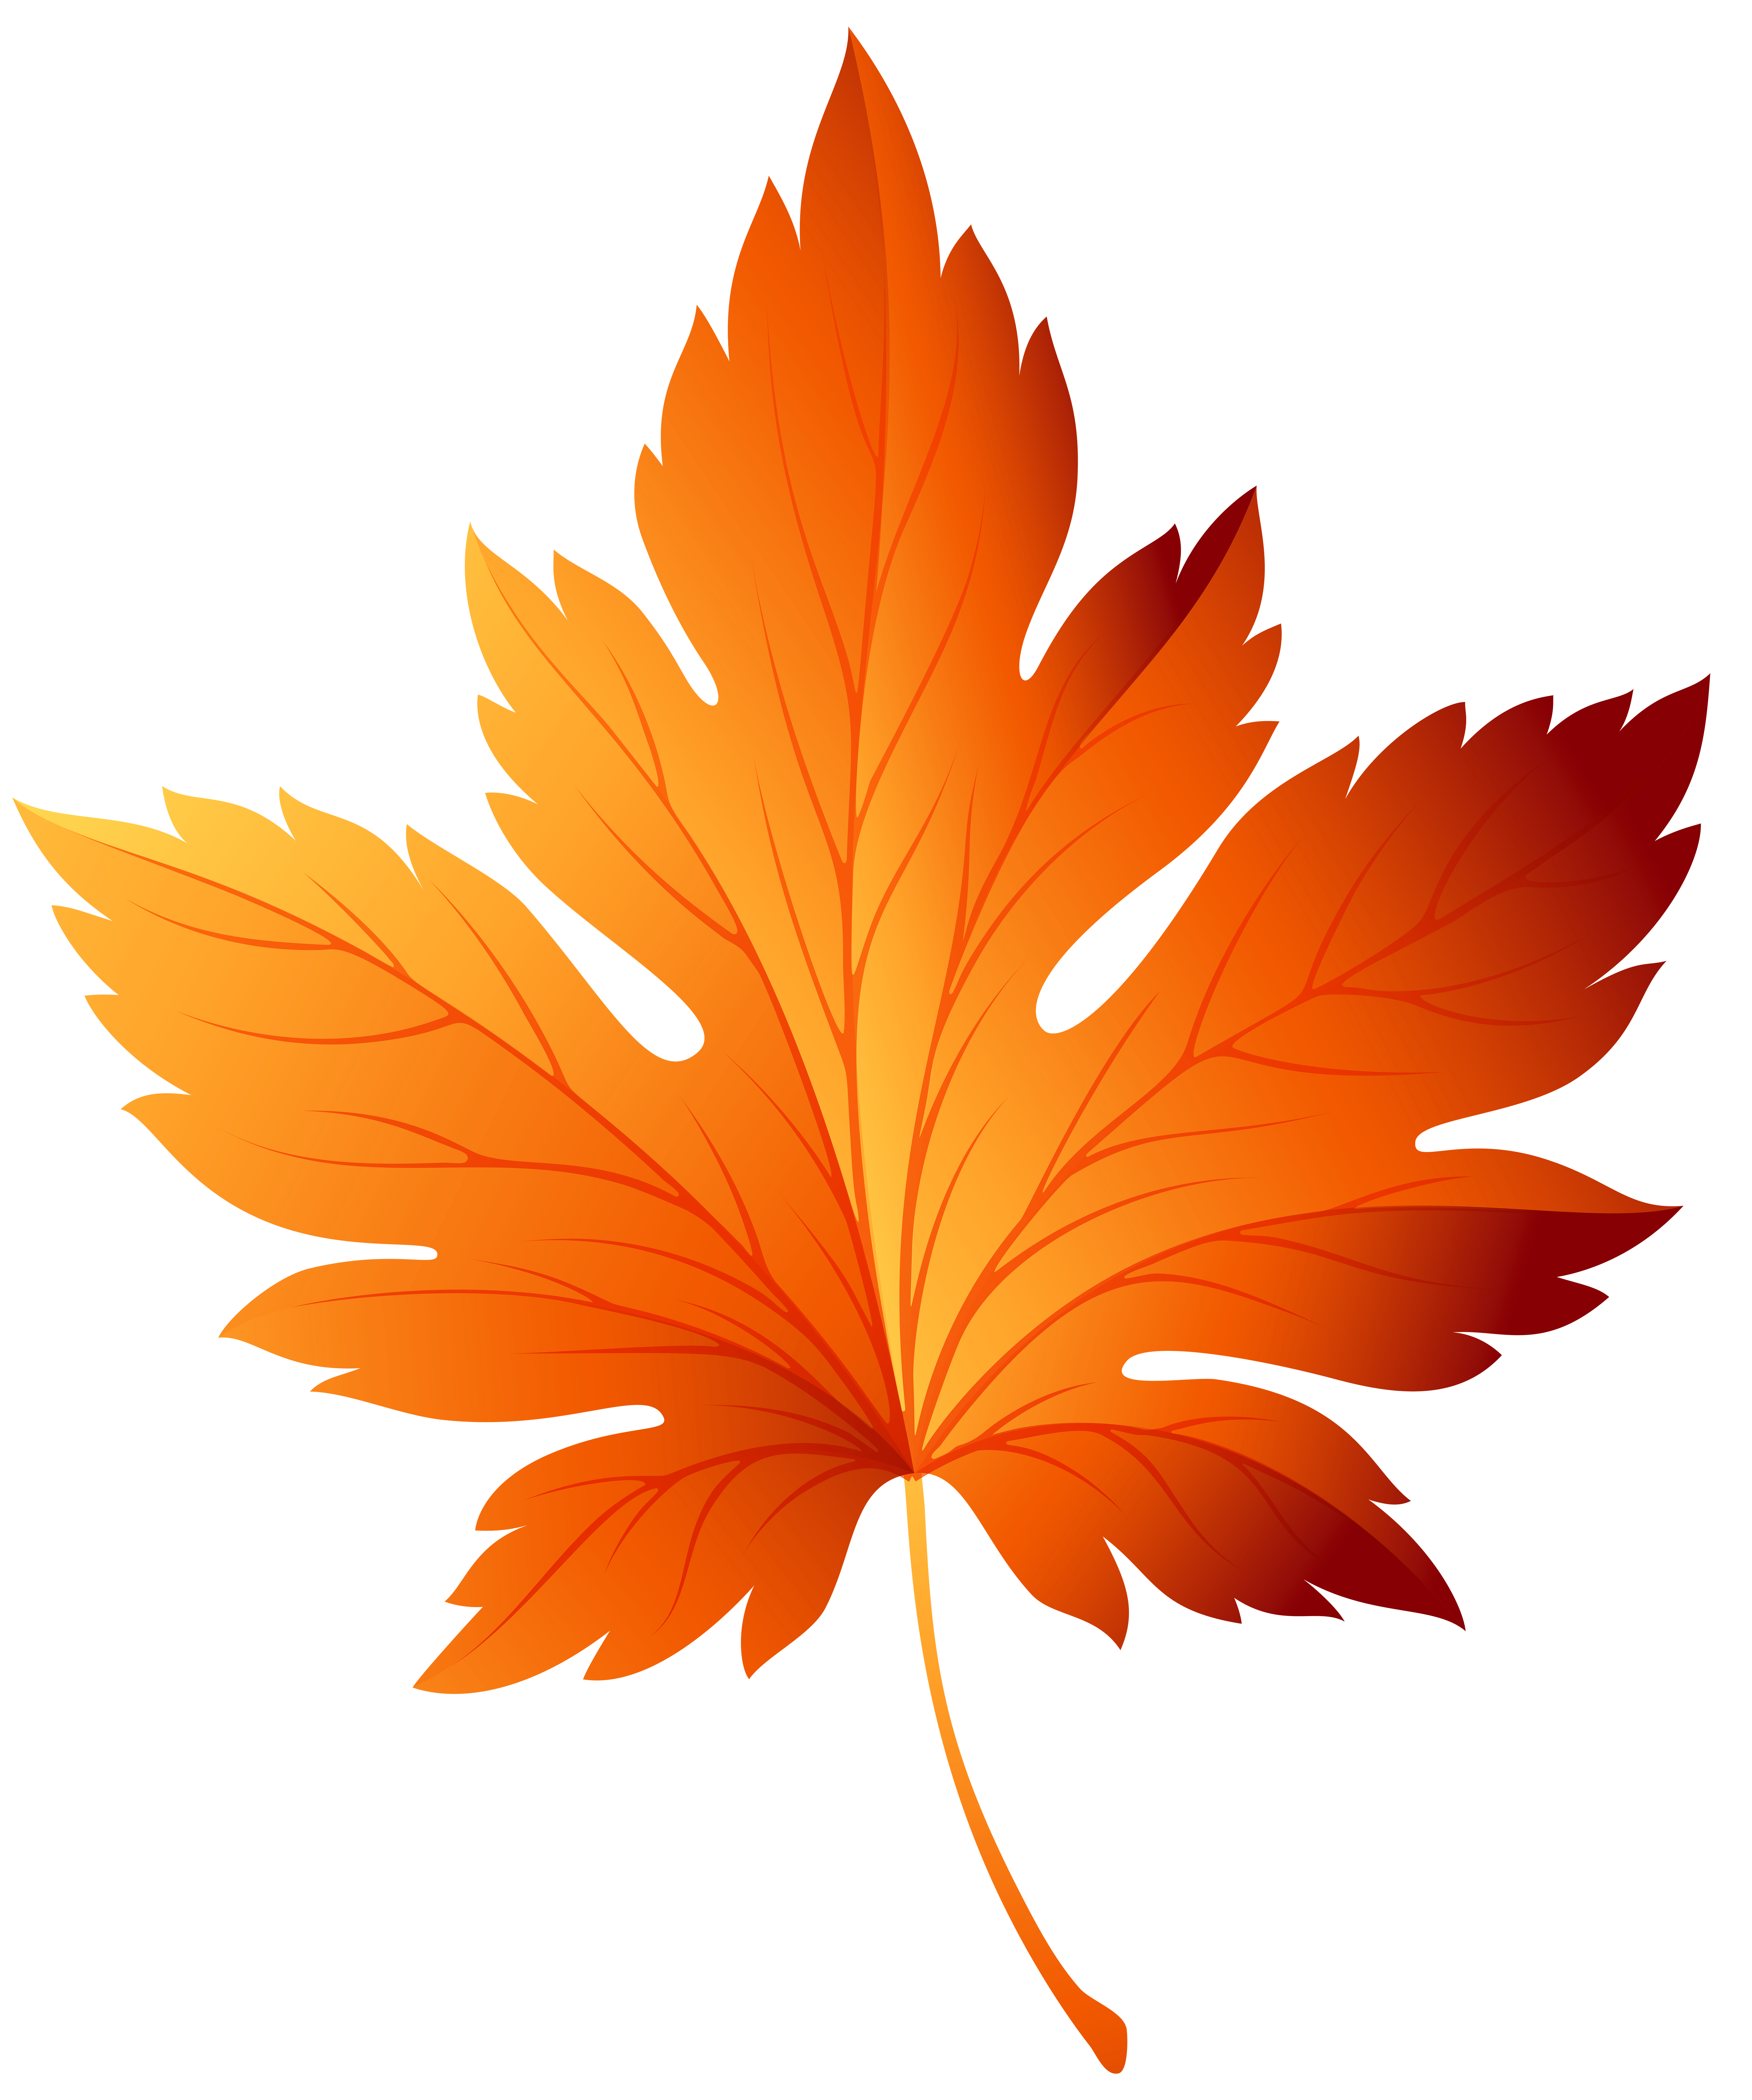 Fall Leaves PNG Background